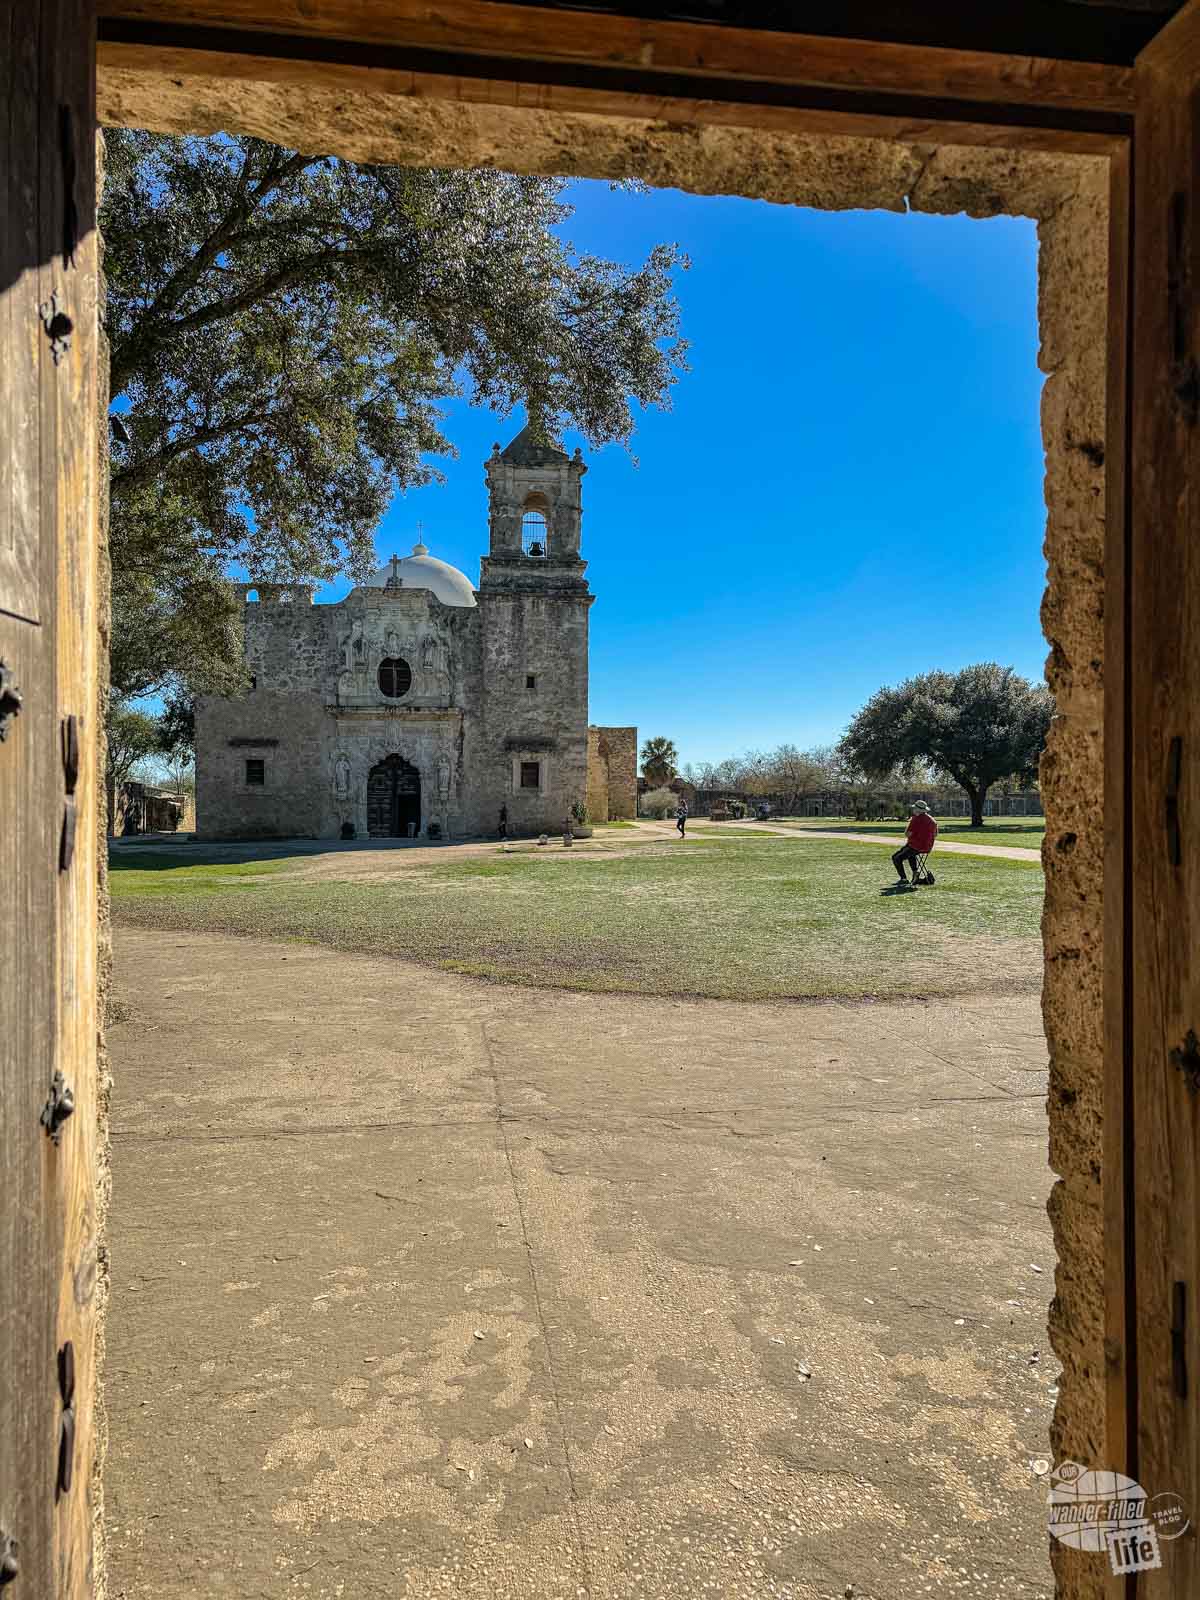 Looking at the front facade of Mission San José in San Antonio Missions National Historical Park.